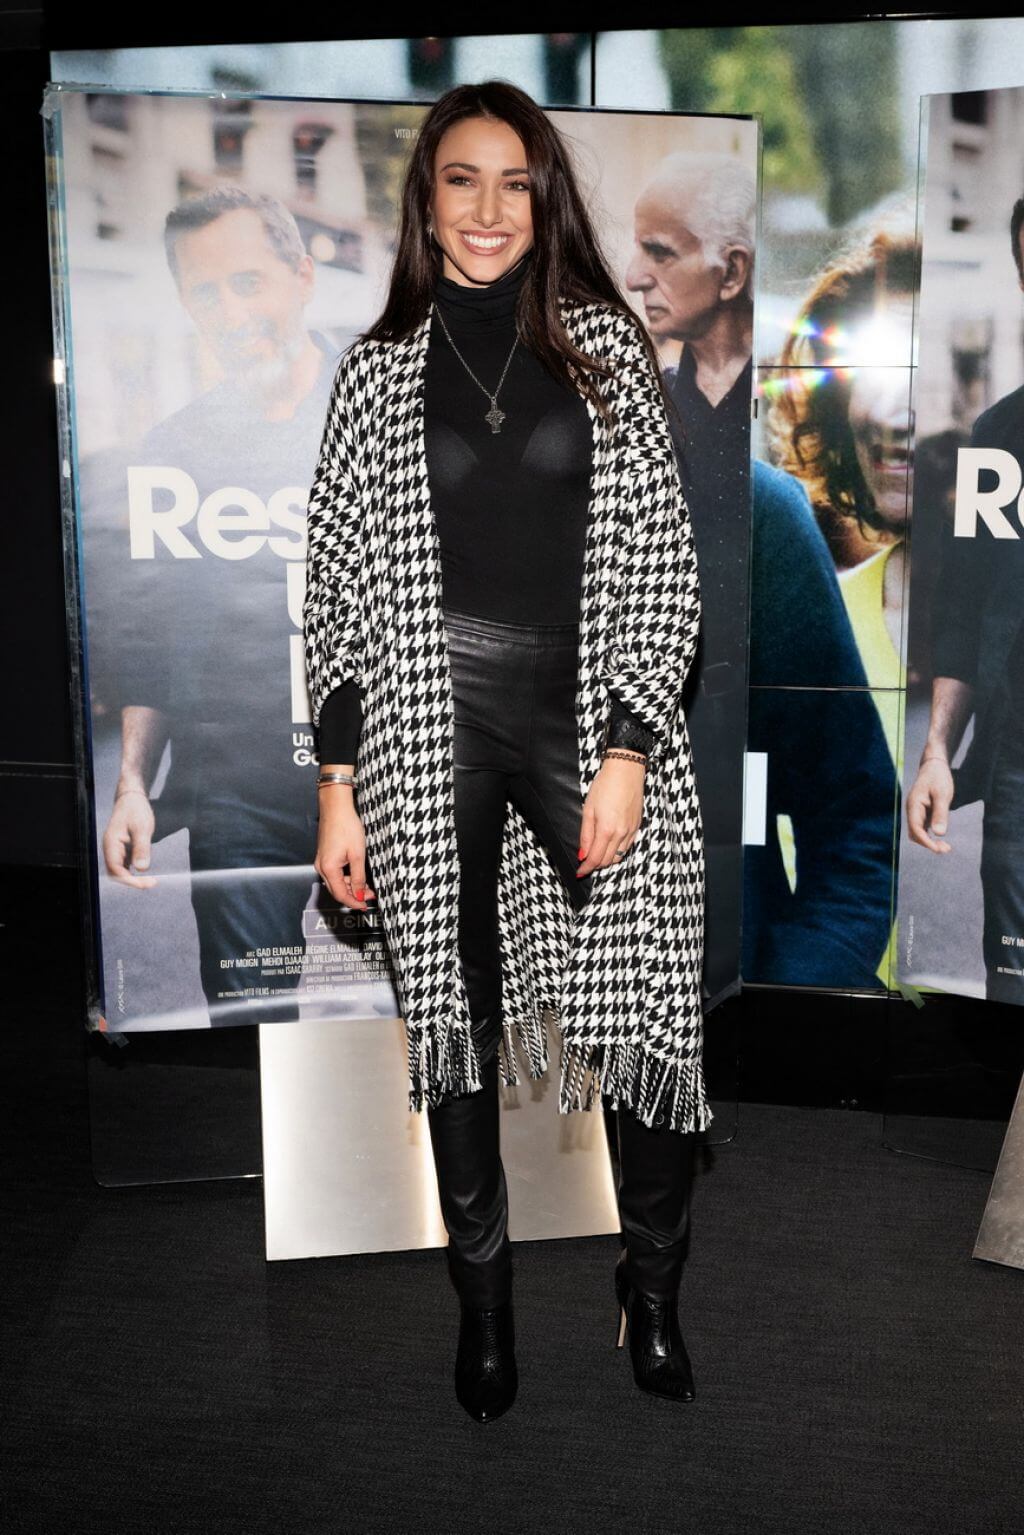 Delphine Wespiser In Black Leather Outfit With Checked Shrug